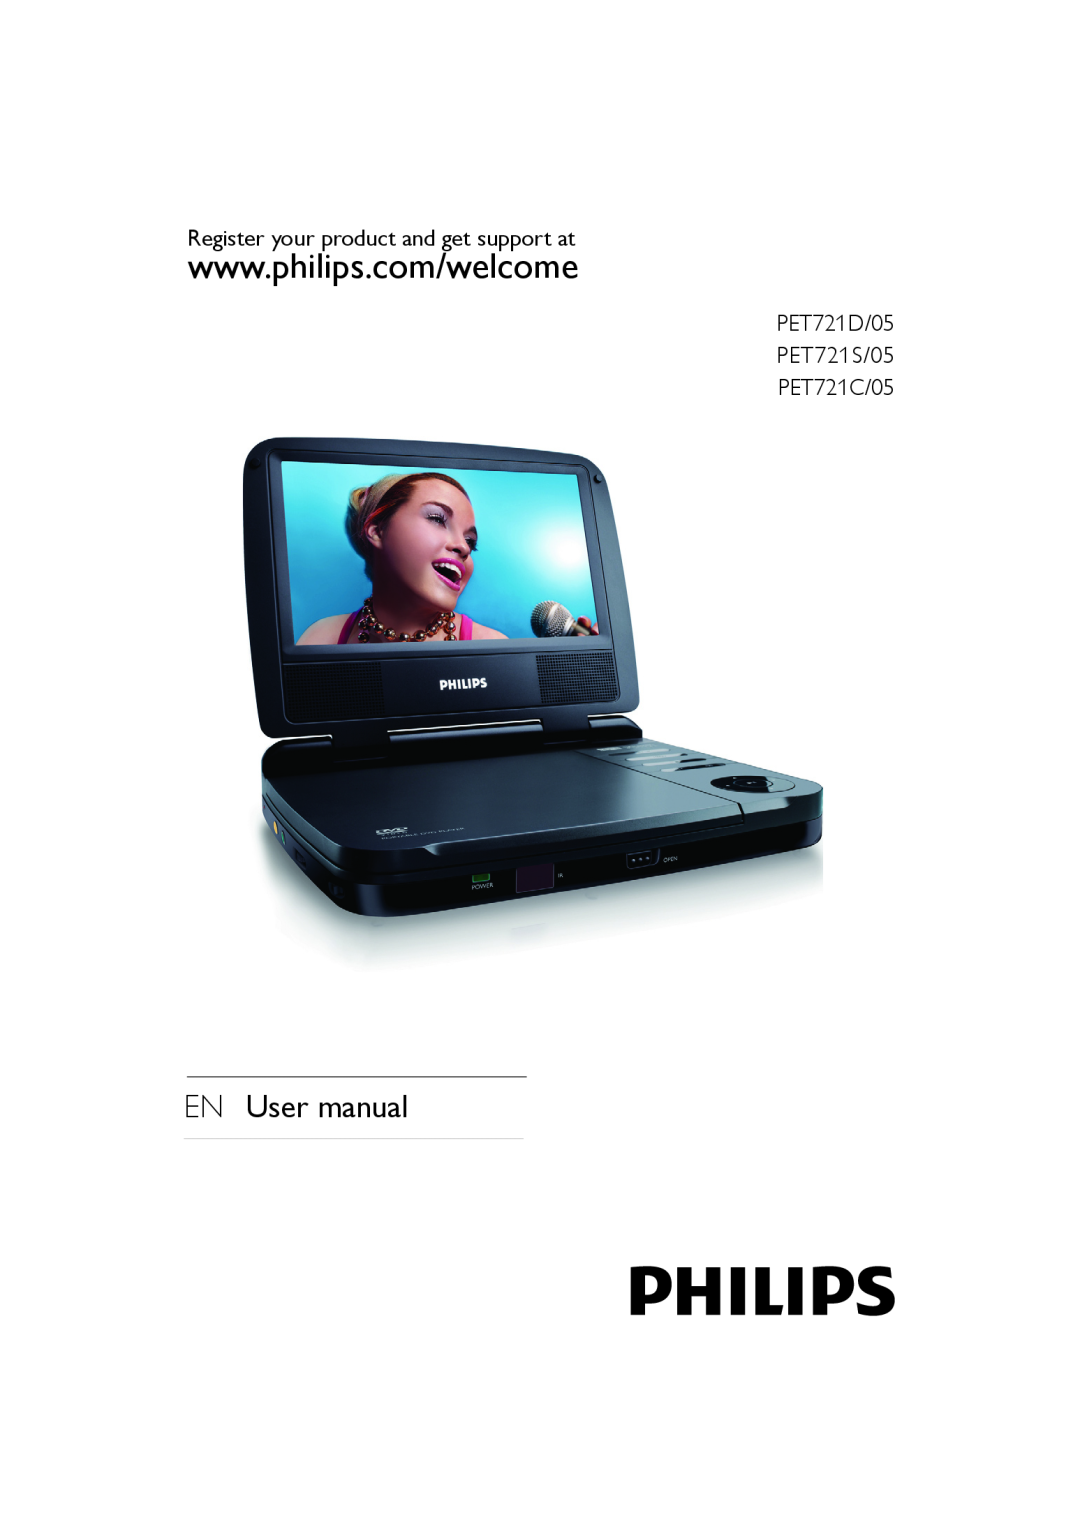 Philips user manual EN User manual, Register your product and get support at, PET721D/05 PET721S/05 PET721C/05 